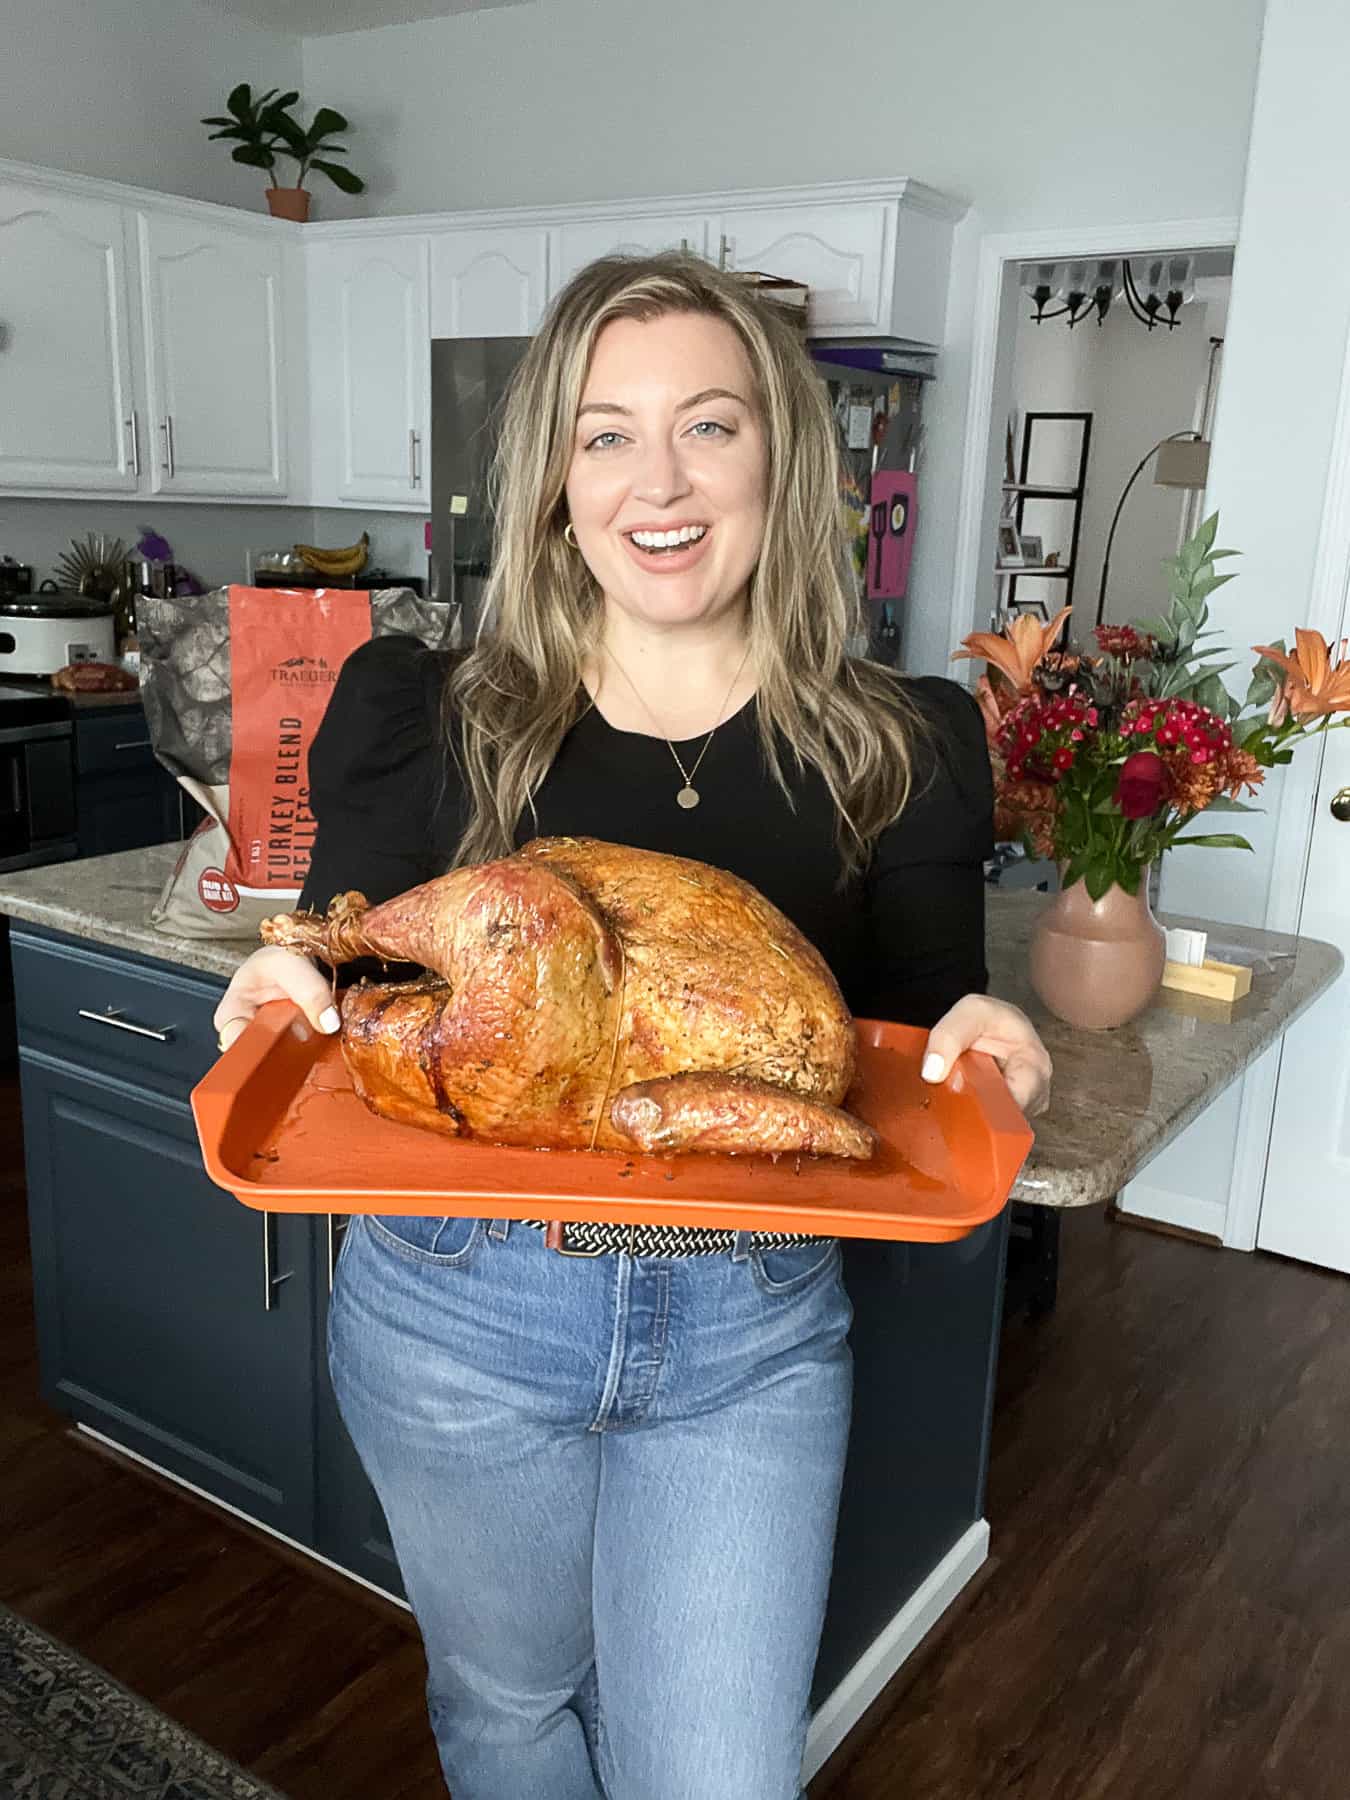 Jenna Passaro Food Blogger From Sip Bite Go Holding Smoked Thanksgiving Turkey Recipe With Bag Of Traeger Turkey Blend Pellets In The Kitchen